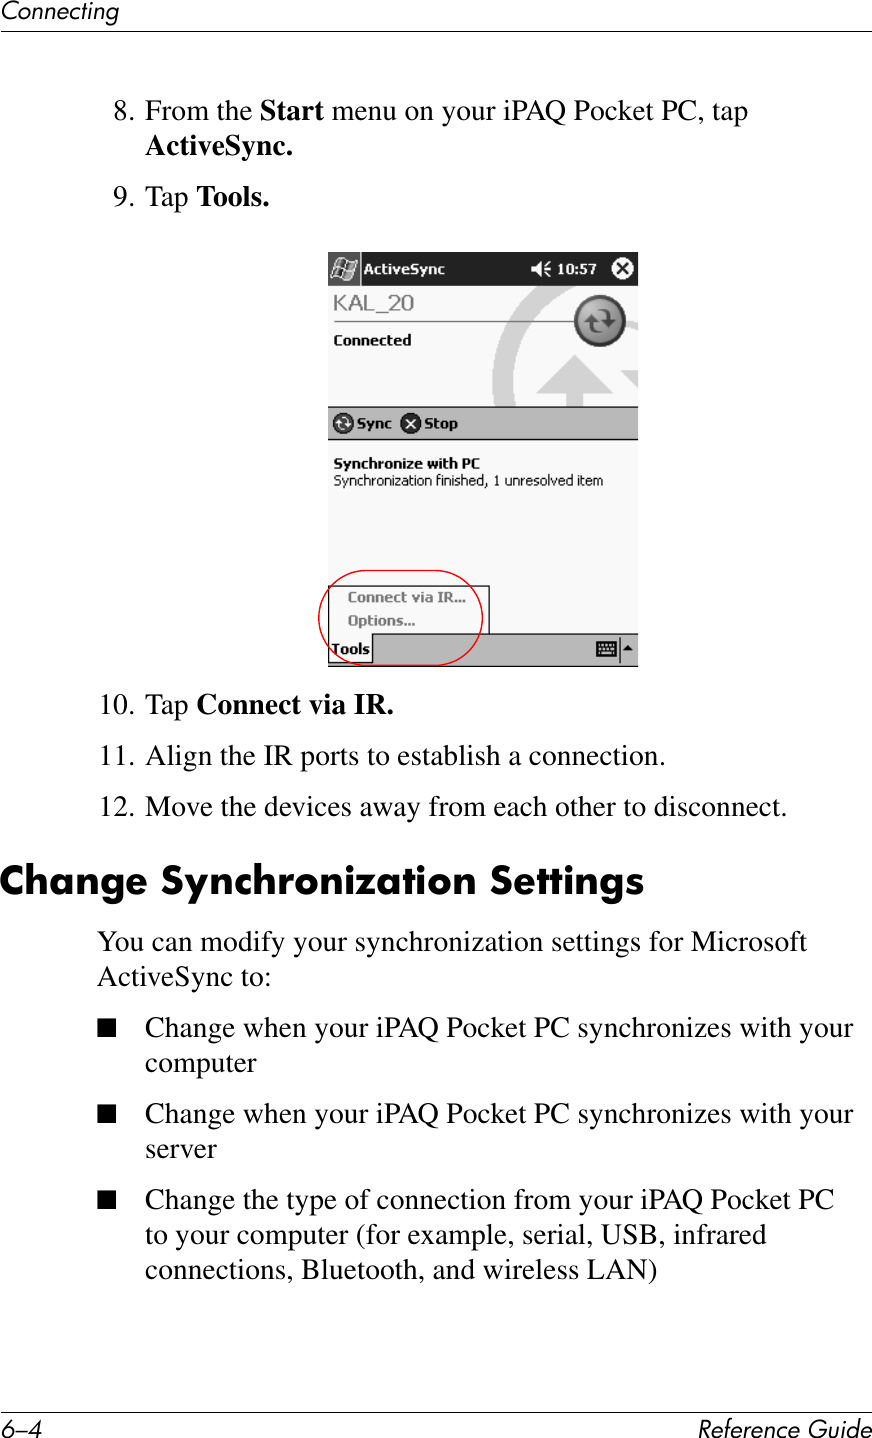 E/C !&quot;#&quot;$&quot;%&amp;&quot;&apos;()*+&quot;67%%&quot;&amp;1*%28. From the Start menu on your iPAQ Pocket PC, tap ActiveSync.9. Tap Tools.10. Tap Connect via IR.11. Align the IR ports to establish a connection.12. Move the devices away from each other to disconnect.2?;$&apos;&quot;&amp;:O$%?!6$)a;7)6$&amp;:&quot;77)$&apos;8You can modify your synchronization settings for Microsoft ActiveSync to:■Change when your iPAQ Pocket PC synchronizes with your computer■Change when your iPAQ Pocket PC synchronizes with your server■Change the type of connection from your iPAQ Pocket PC to your computer (for example, serial, USB, infrared connections, Bluetooth, and wireless LAN)